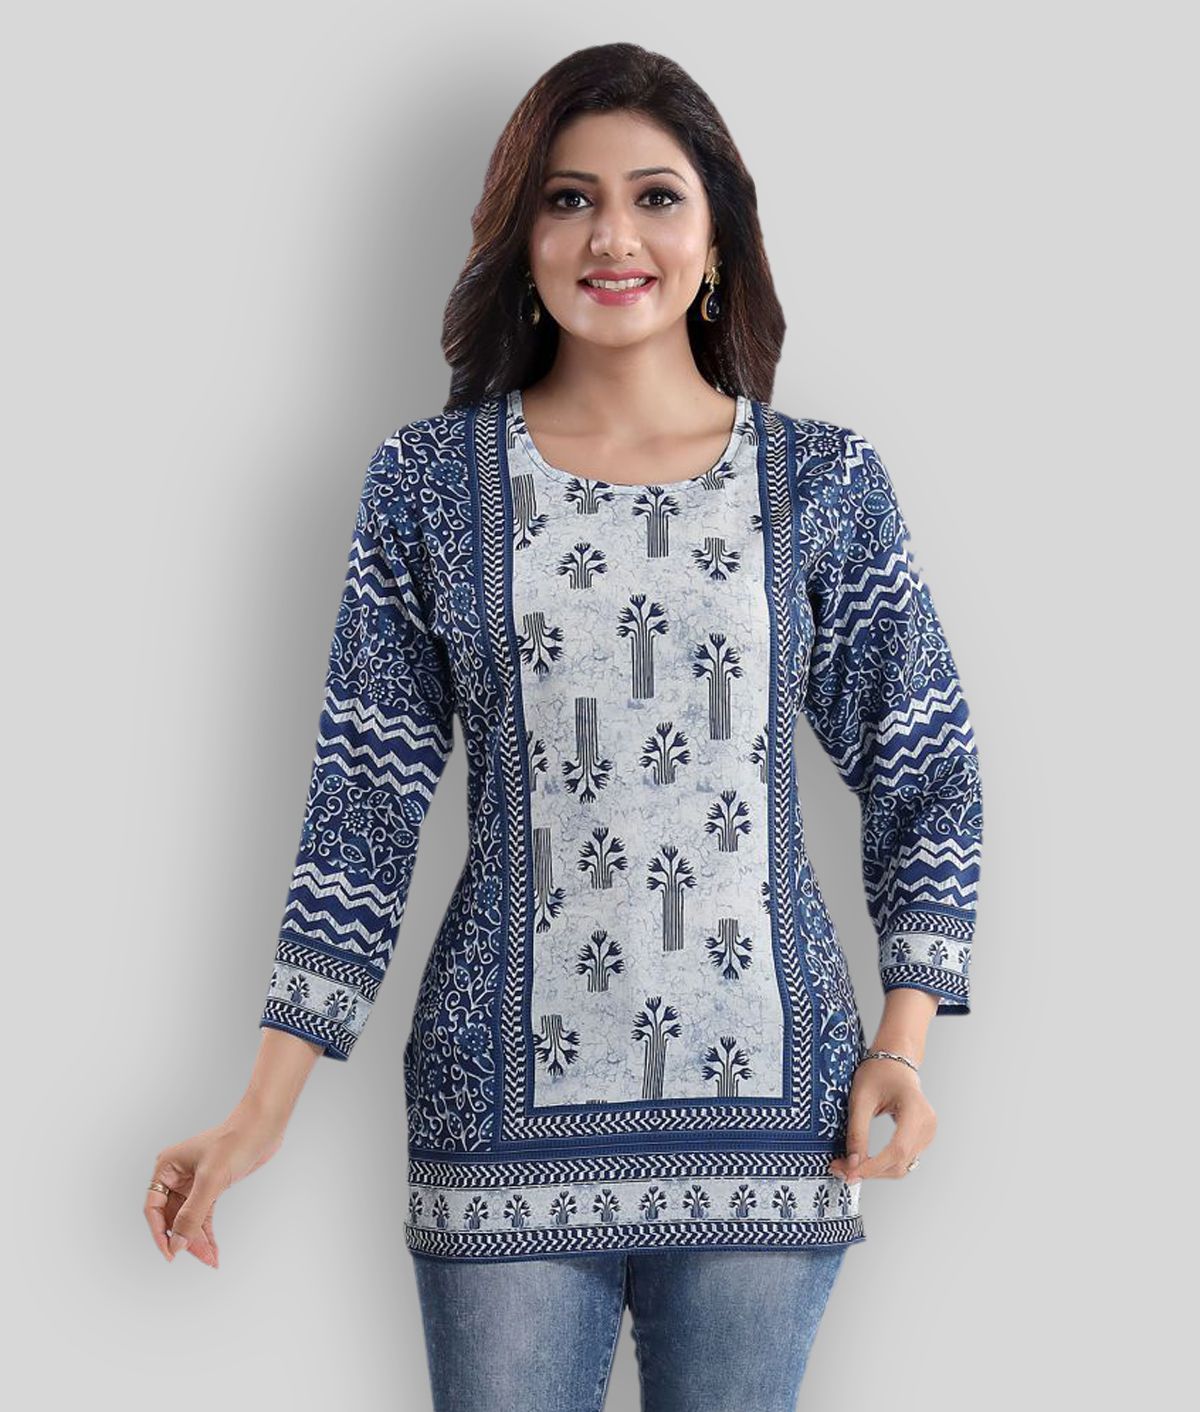     			Meher Impex - Blue Crepe Women's Straight Kurti ( Pack of 1 )